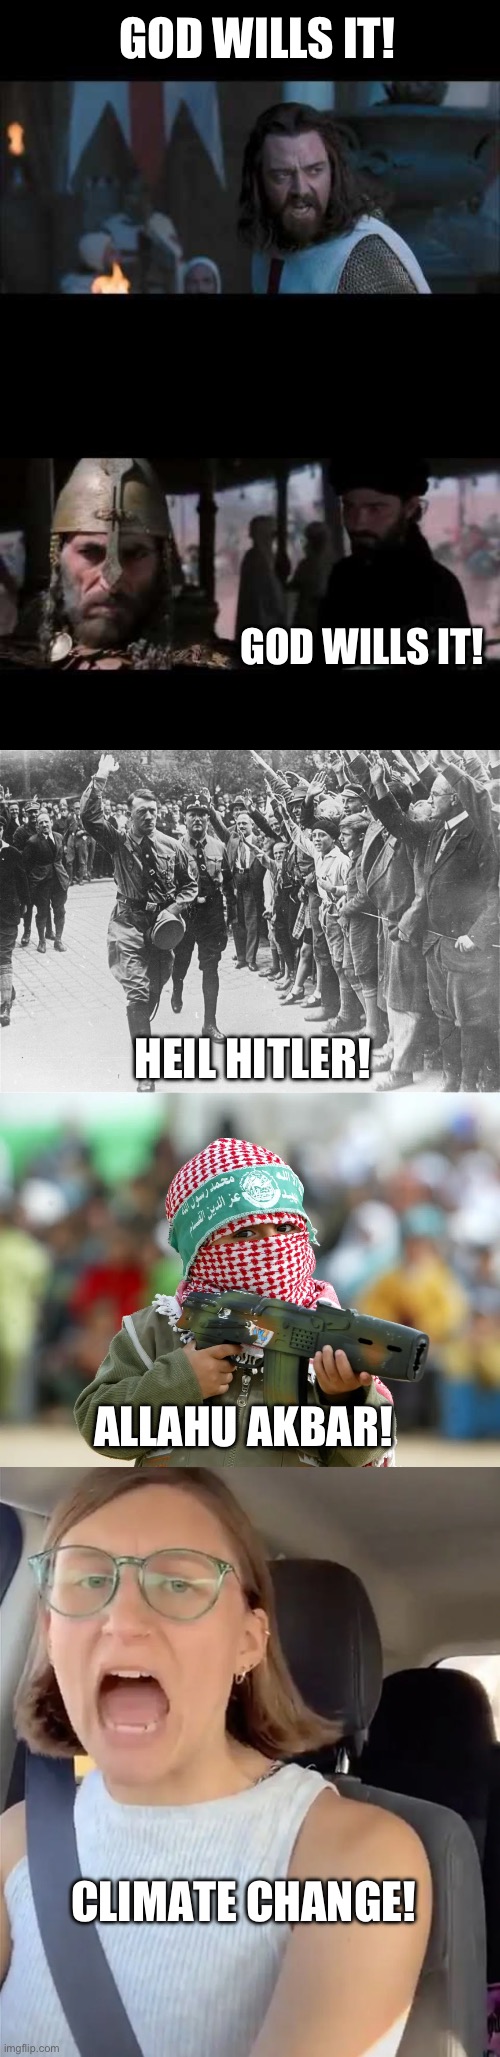 It’s not the will of God. It’s just your excuse to hurt people. | GOD WILLS IT! GOD WILLS IT! HEIL HITLER! ALLAHU AKBAR! CLIMATE CHANGE! | image tagged in politics,religion,climate change,terrorism,israel,stupid people | made w/ Imgflip meme maker